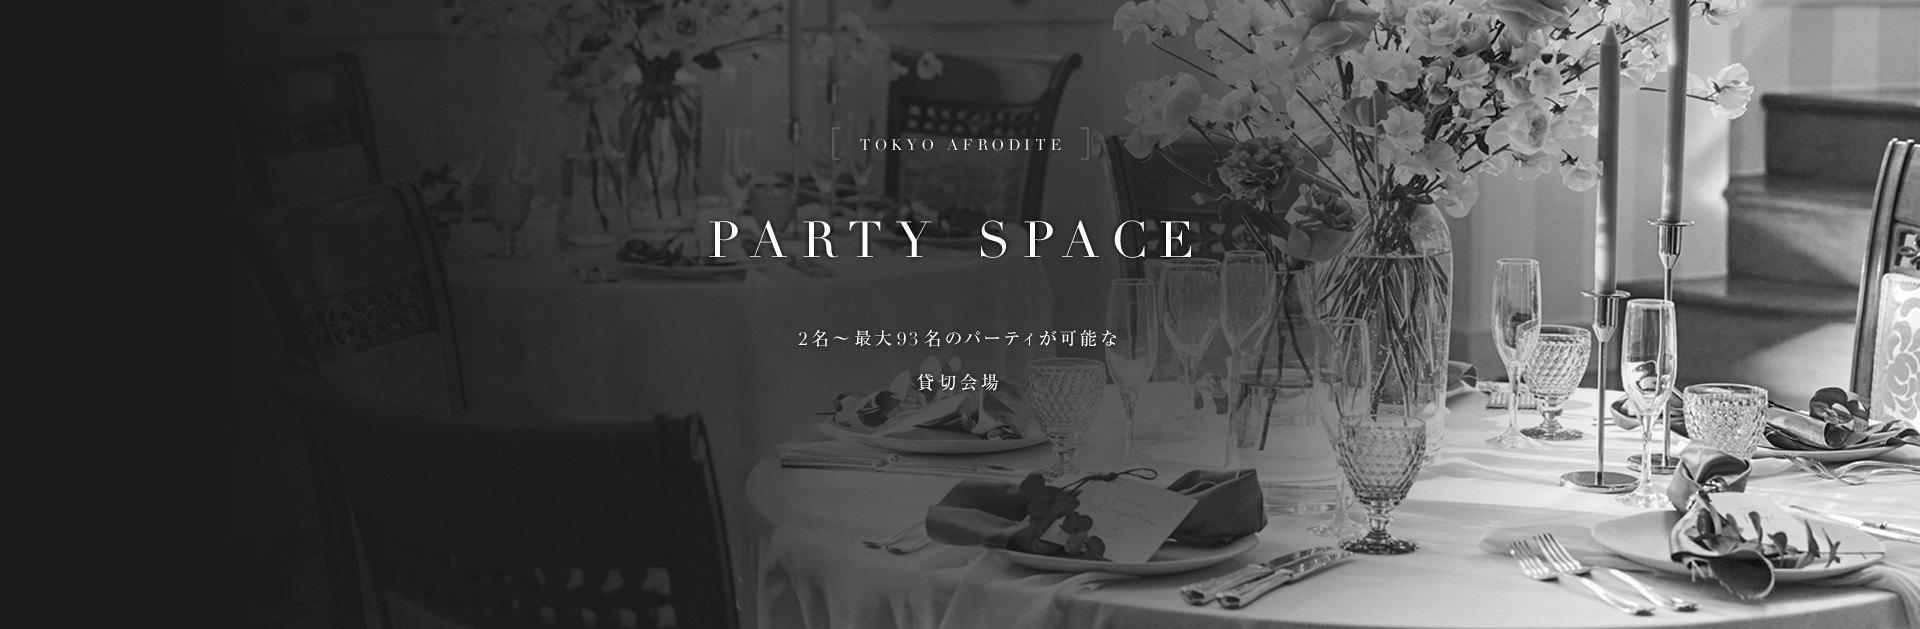 PARTY SPACE 2名～最大93名のパーティーが可能な貸切会場